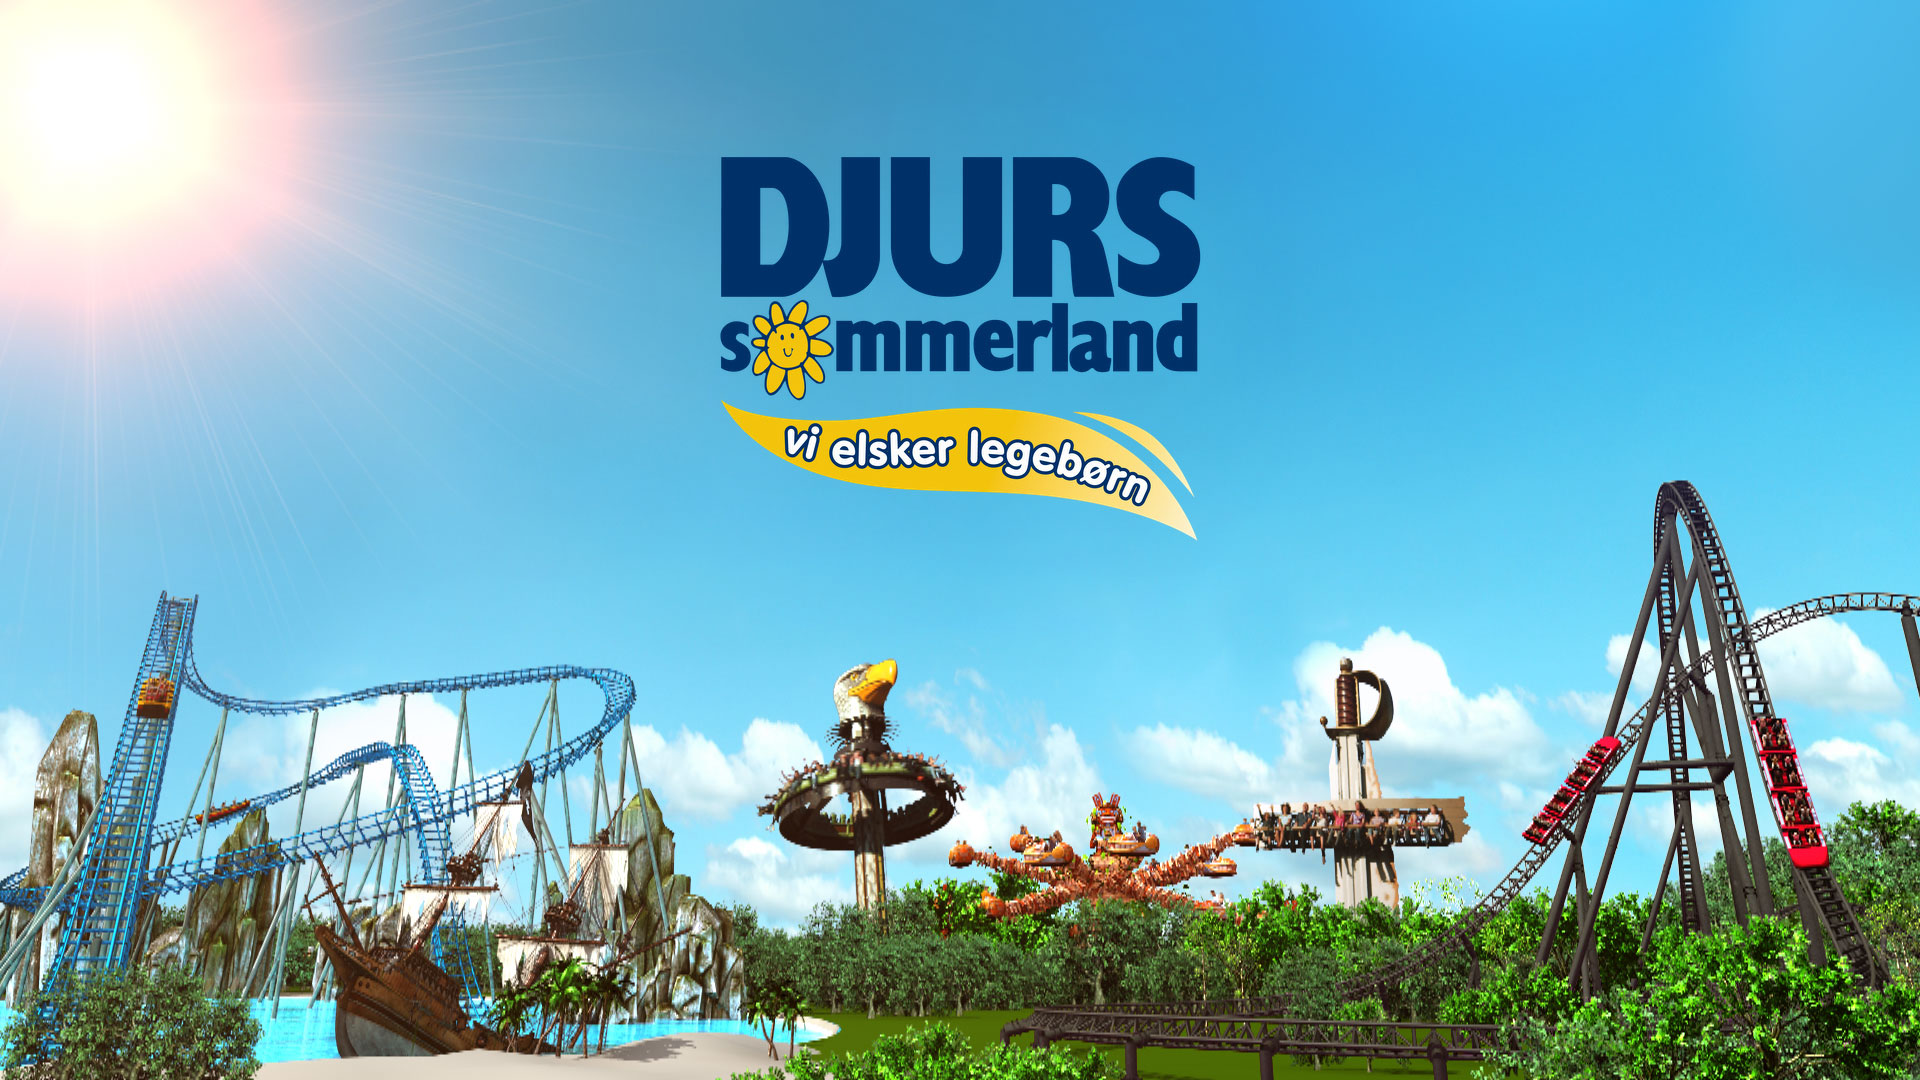 CANCELLED - Trip to Djurs Sommerland w. IDA Herning